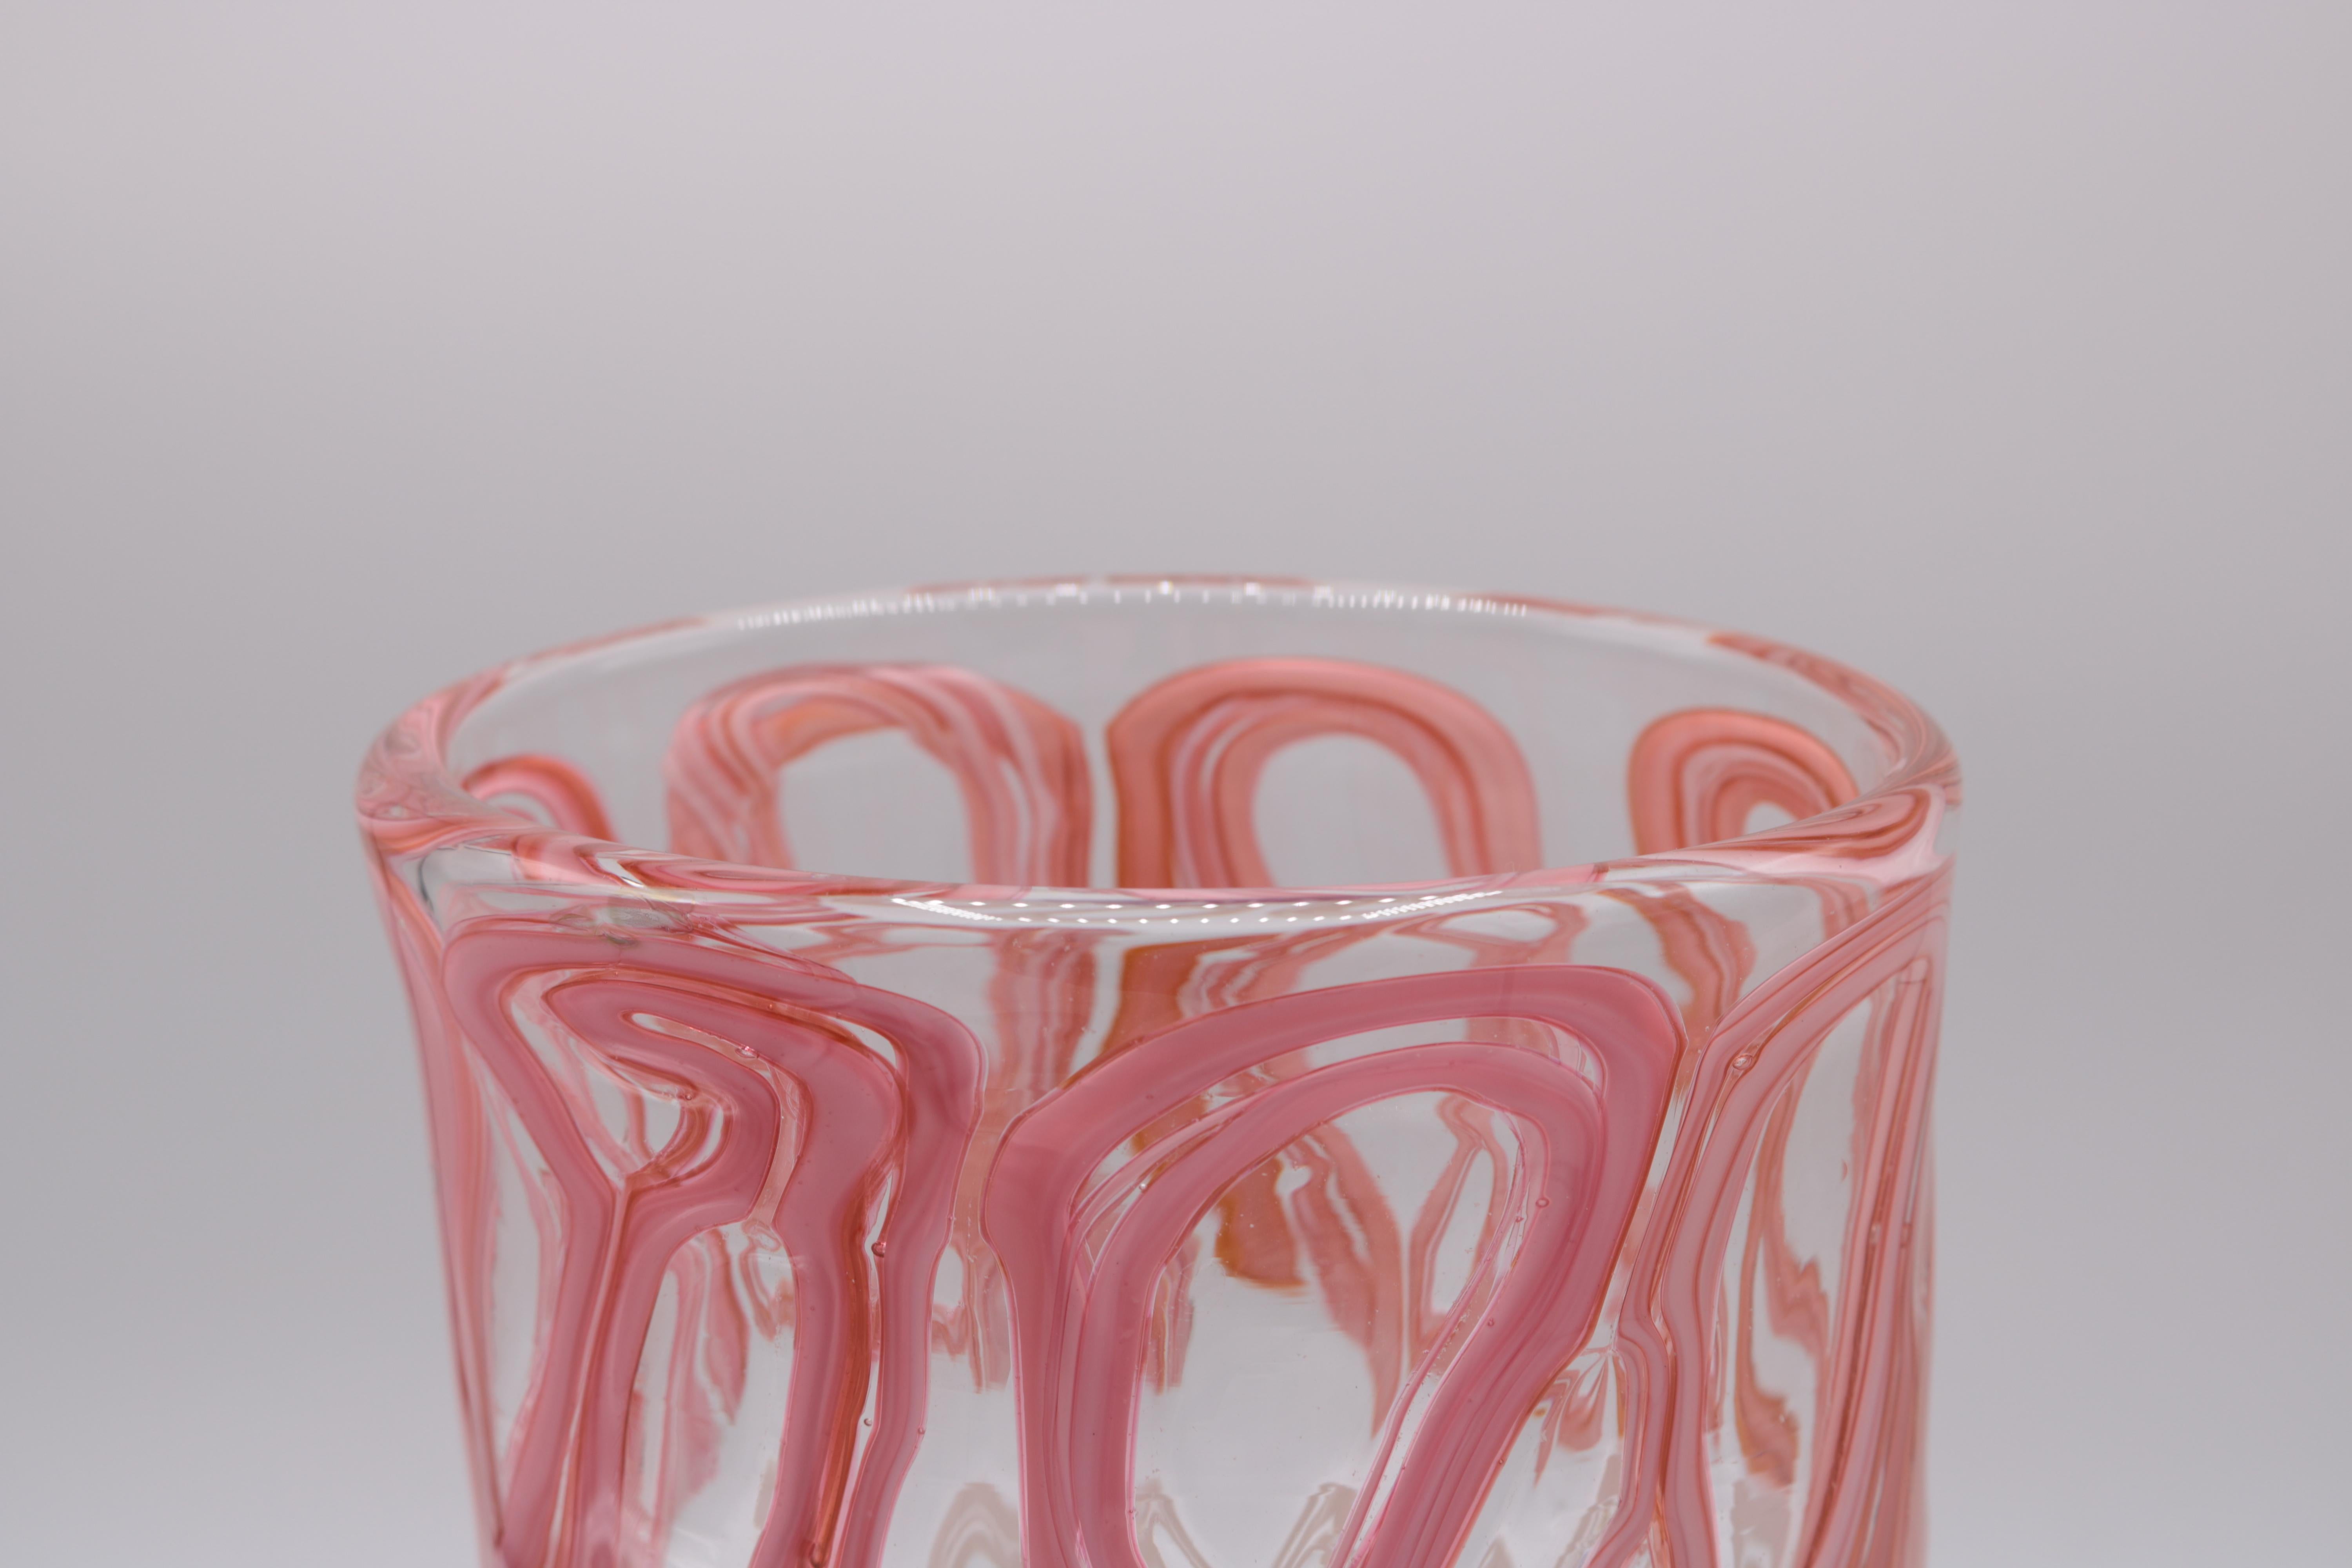 Limited edition art glass vase by Martin Postch. 
Oval shape clear glass with pink, white and purple details. 
Etched signature on the bottom.